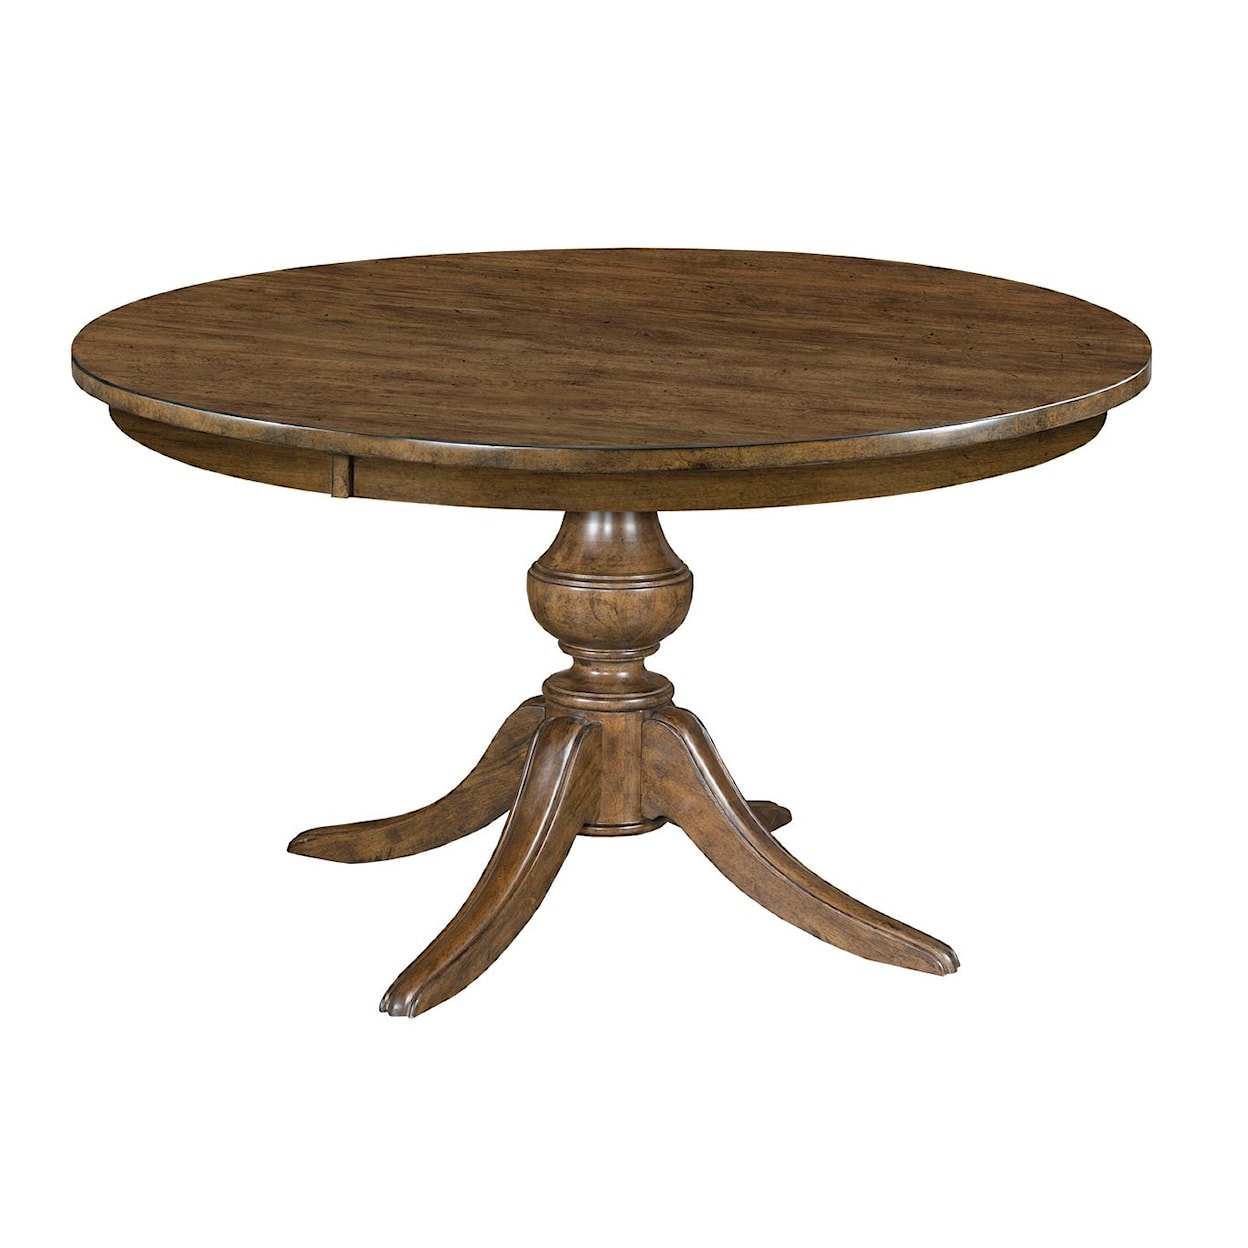 Kincaid Furniture The Nook 54" Round Dining Table w/ Wood Base